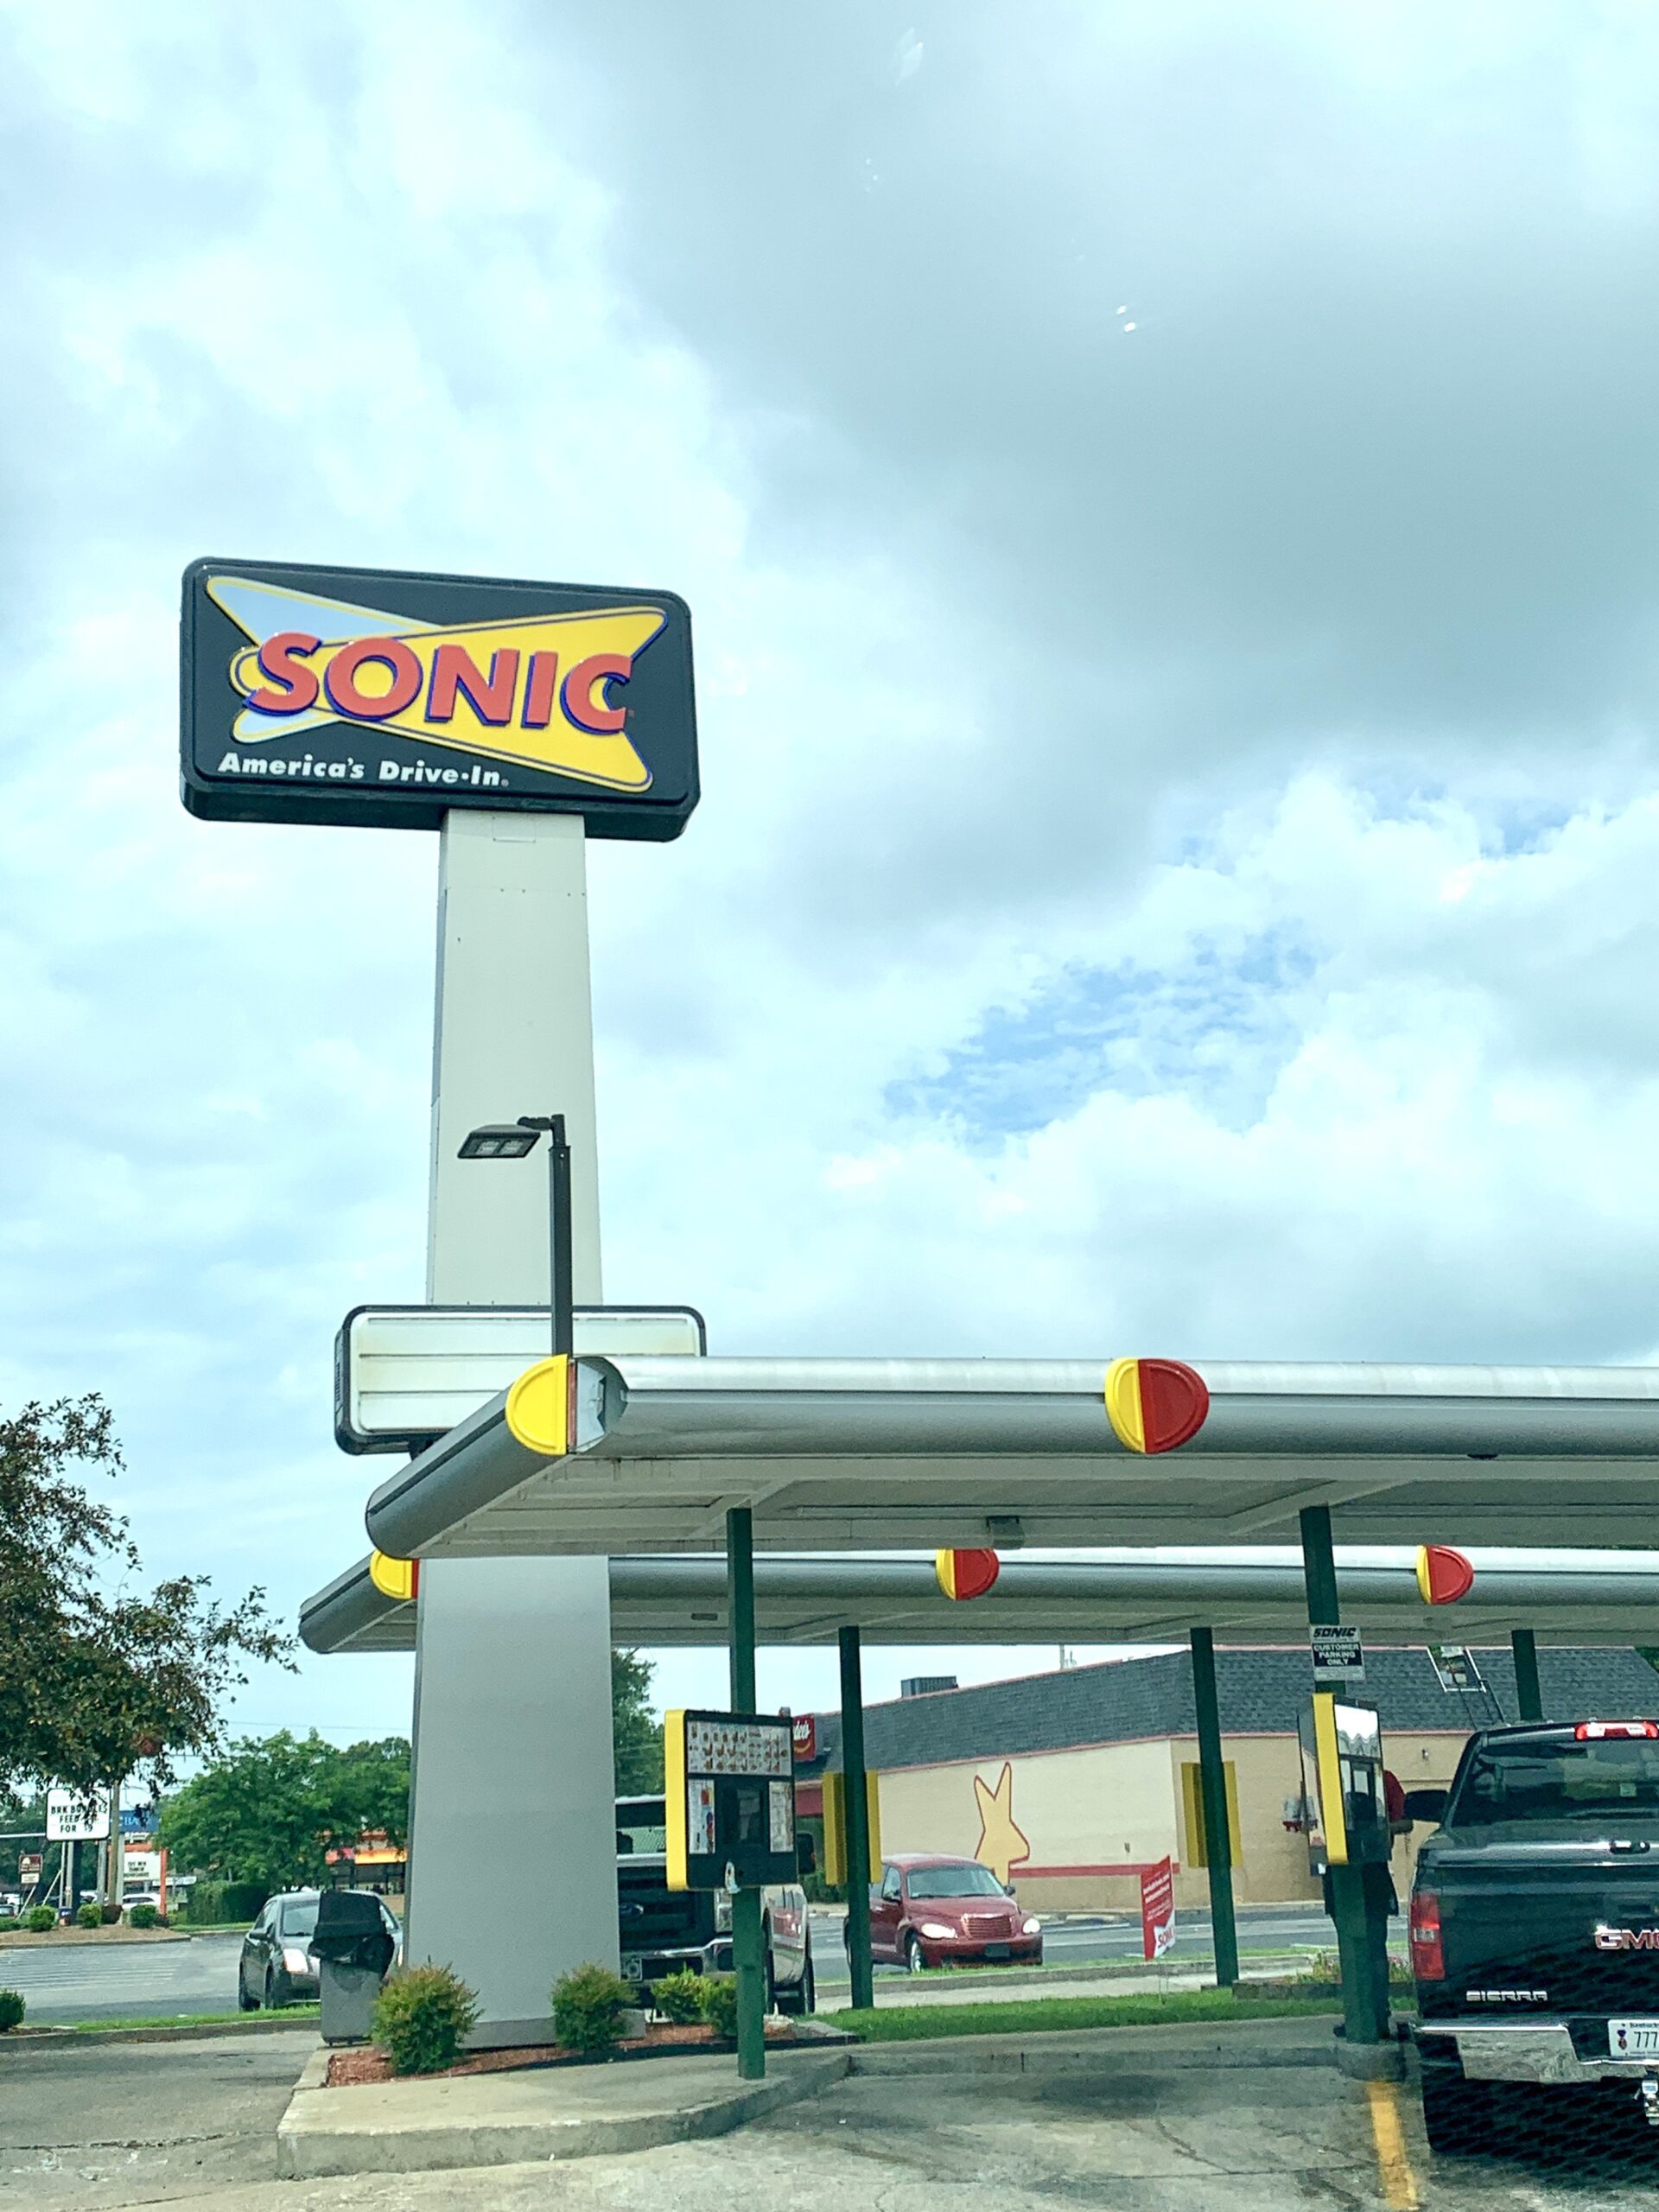 A sonic gas station with cars parked in front of it.